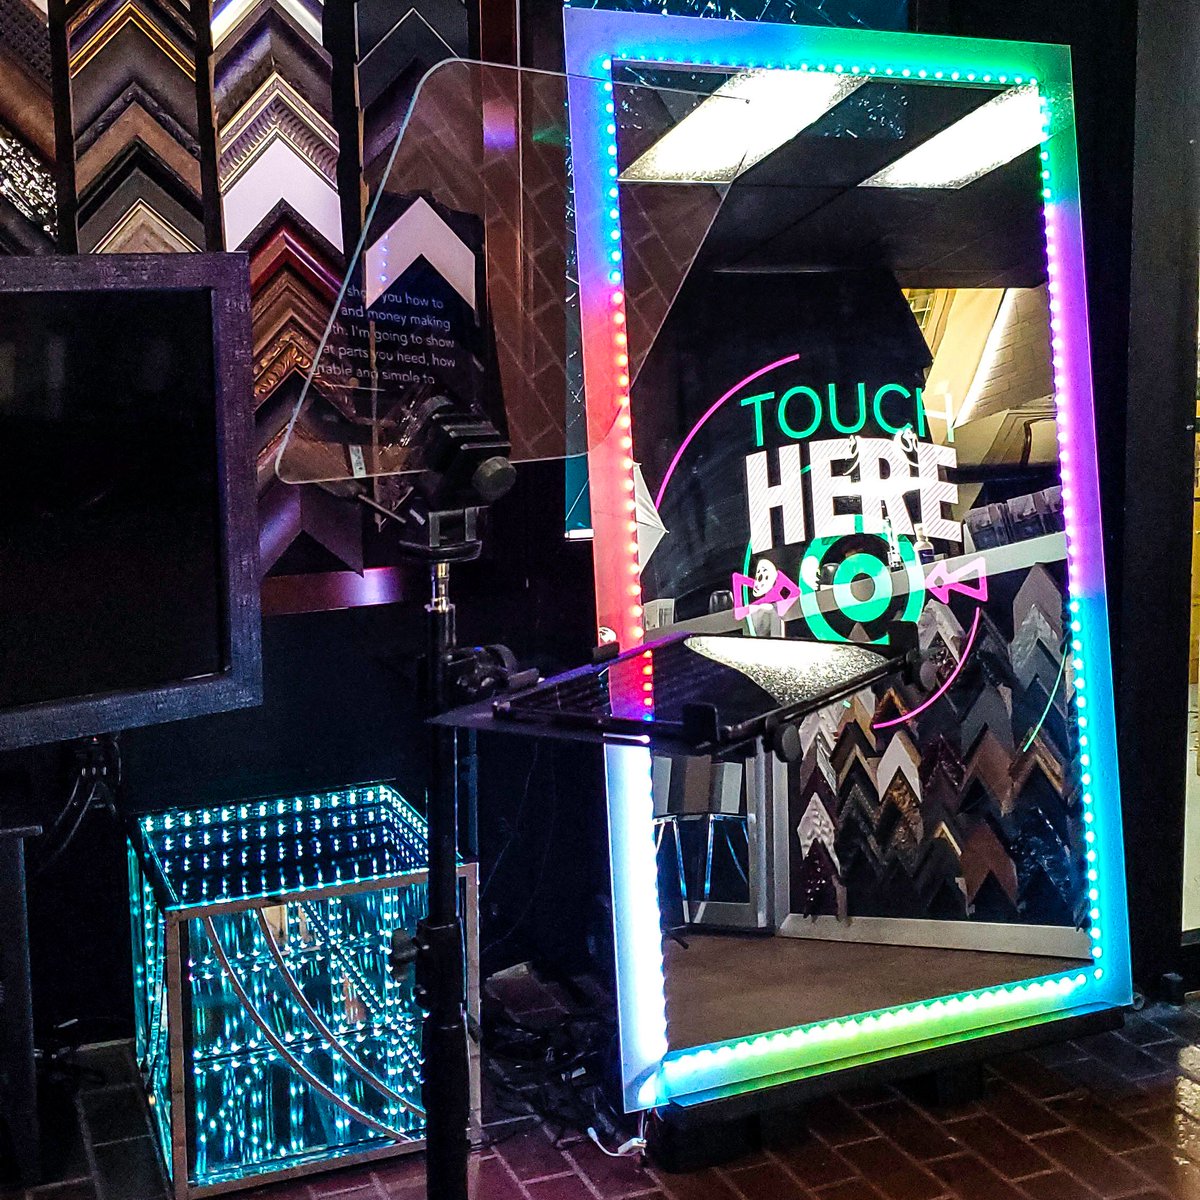 Want a cool idea for videos, events and parties?! Have you ever thought about building your own SMART Photo Booth?!?! We have! #teleprompter #photobooth, #teleprompterspeech, #pose #diyphotobooth #largephotobooth #diy #SMARTmirror #ISO #photoboothapp #snapphoto